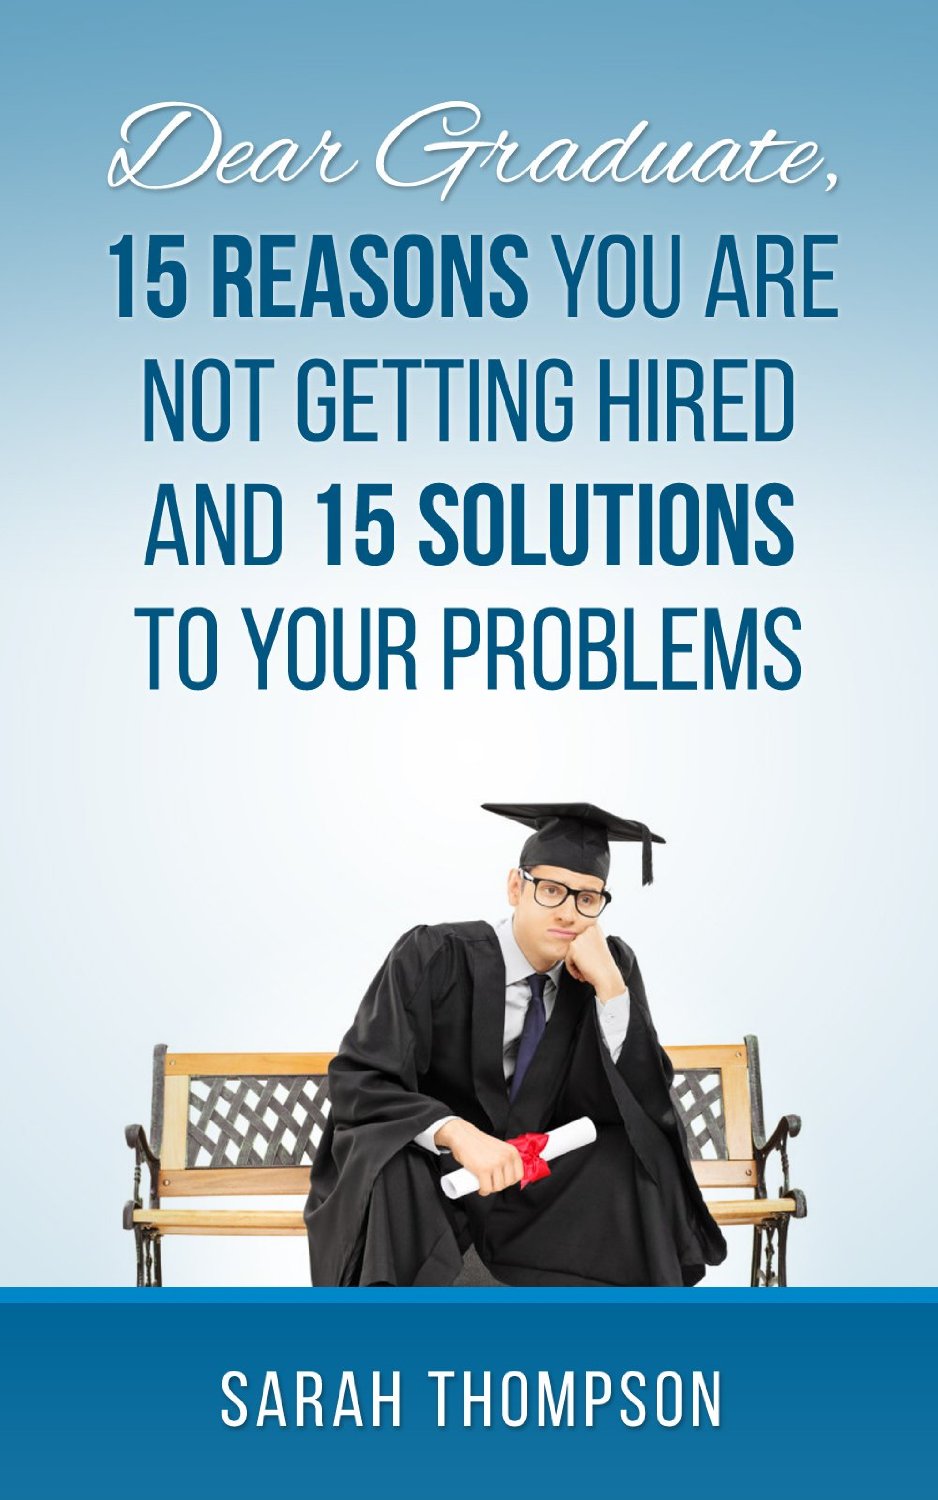 Dear Graduate,15 Reasons Why You Are Not Getting Hired And 15 solutions To Your Problem by Sarah Thompson